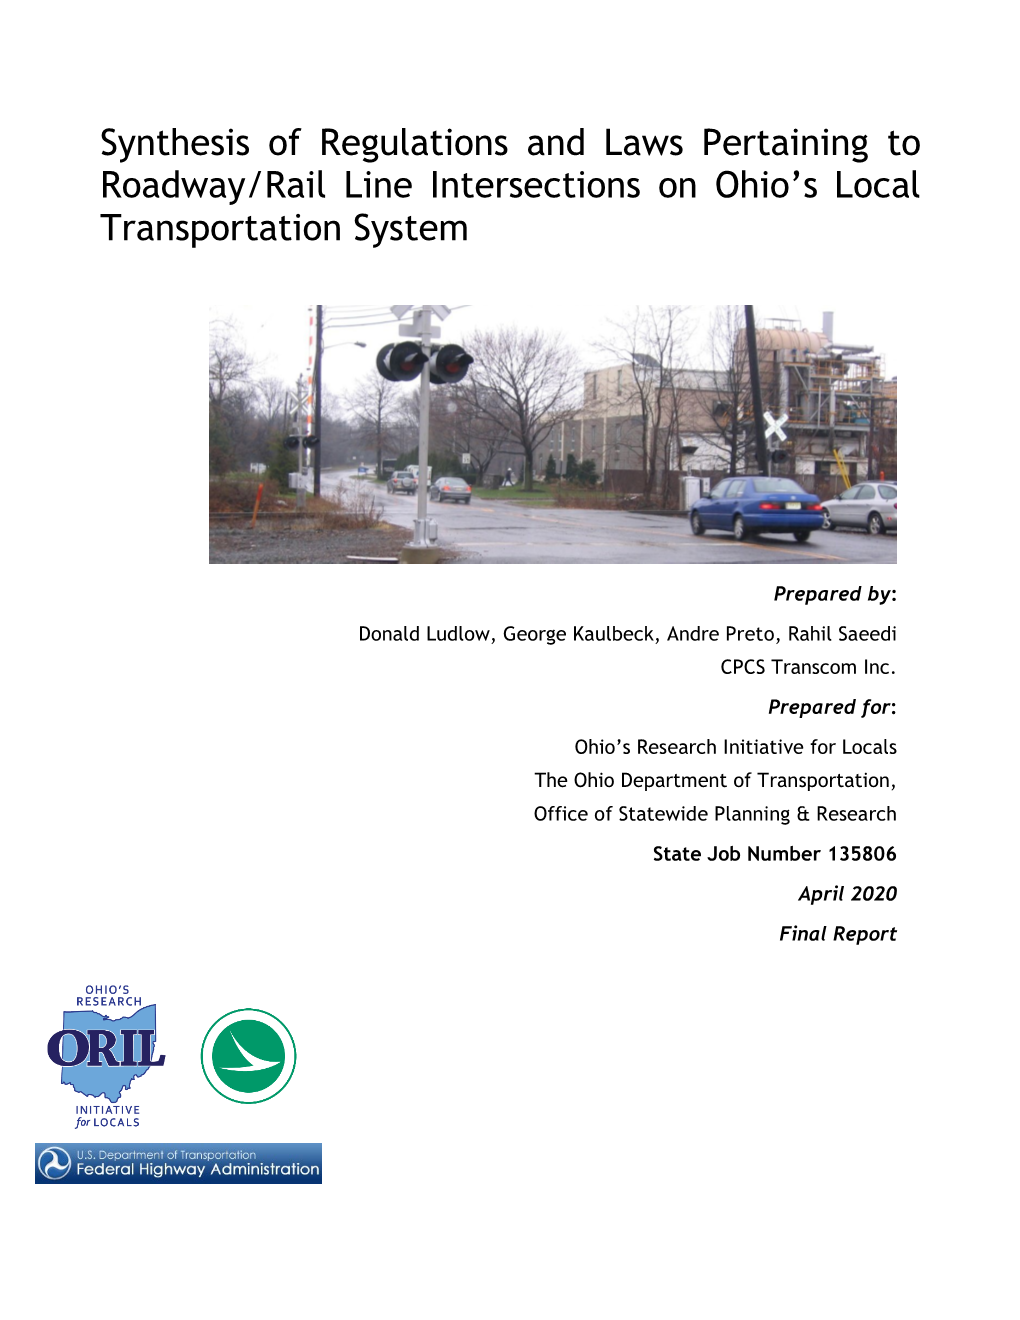 Synthesis of Regulations and Laws Pertaining to Roadway/Rail Line Intersections on Ohio’S Local Transportation System